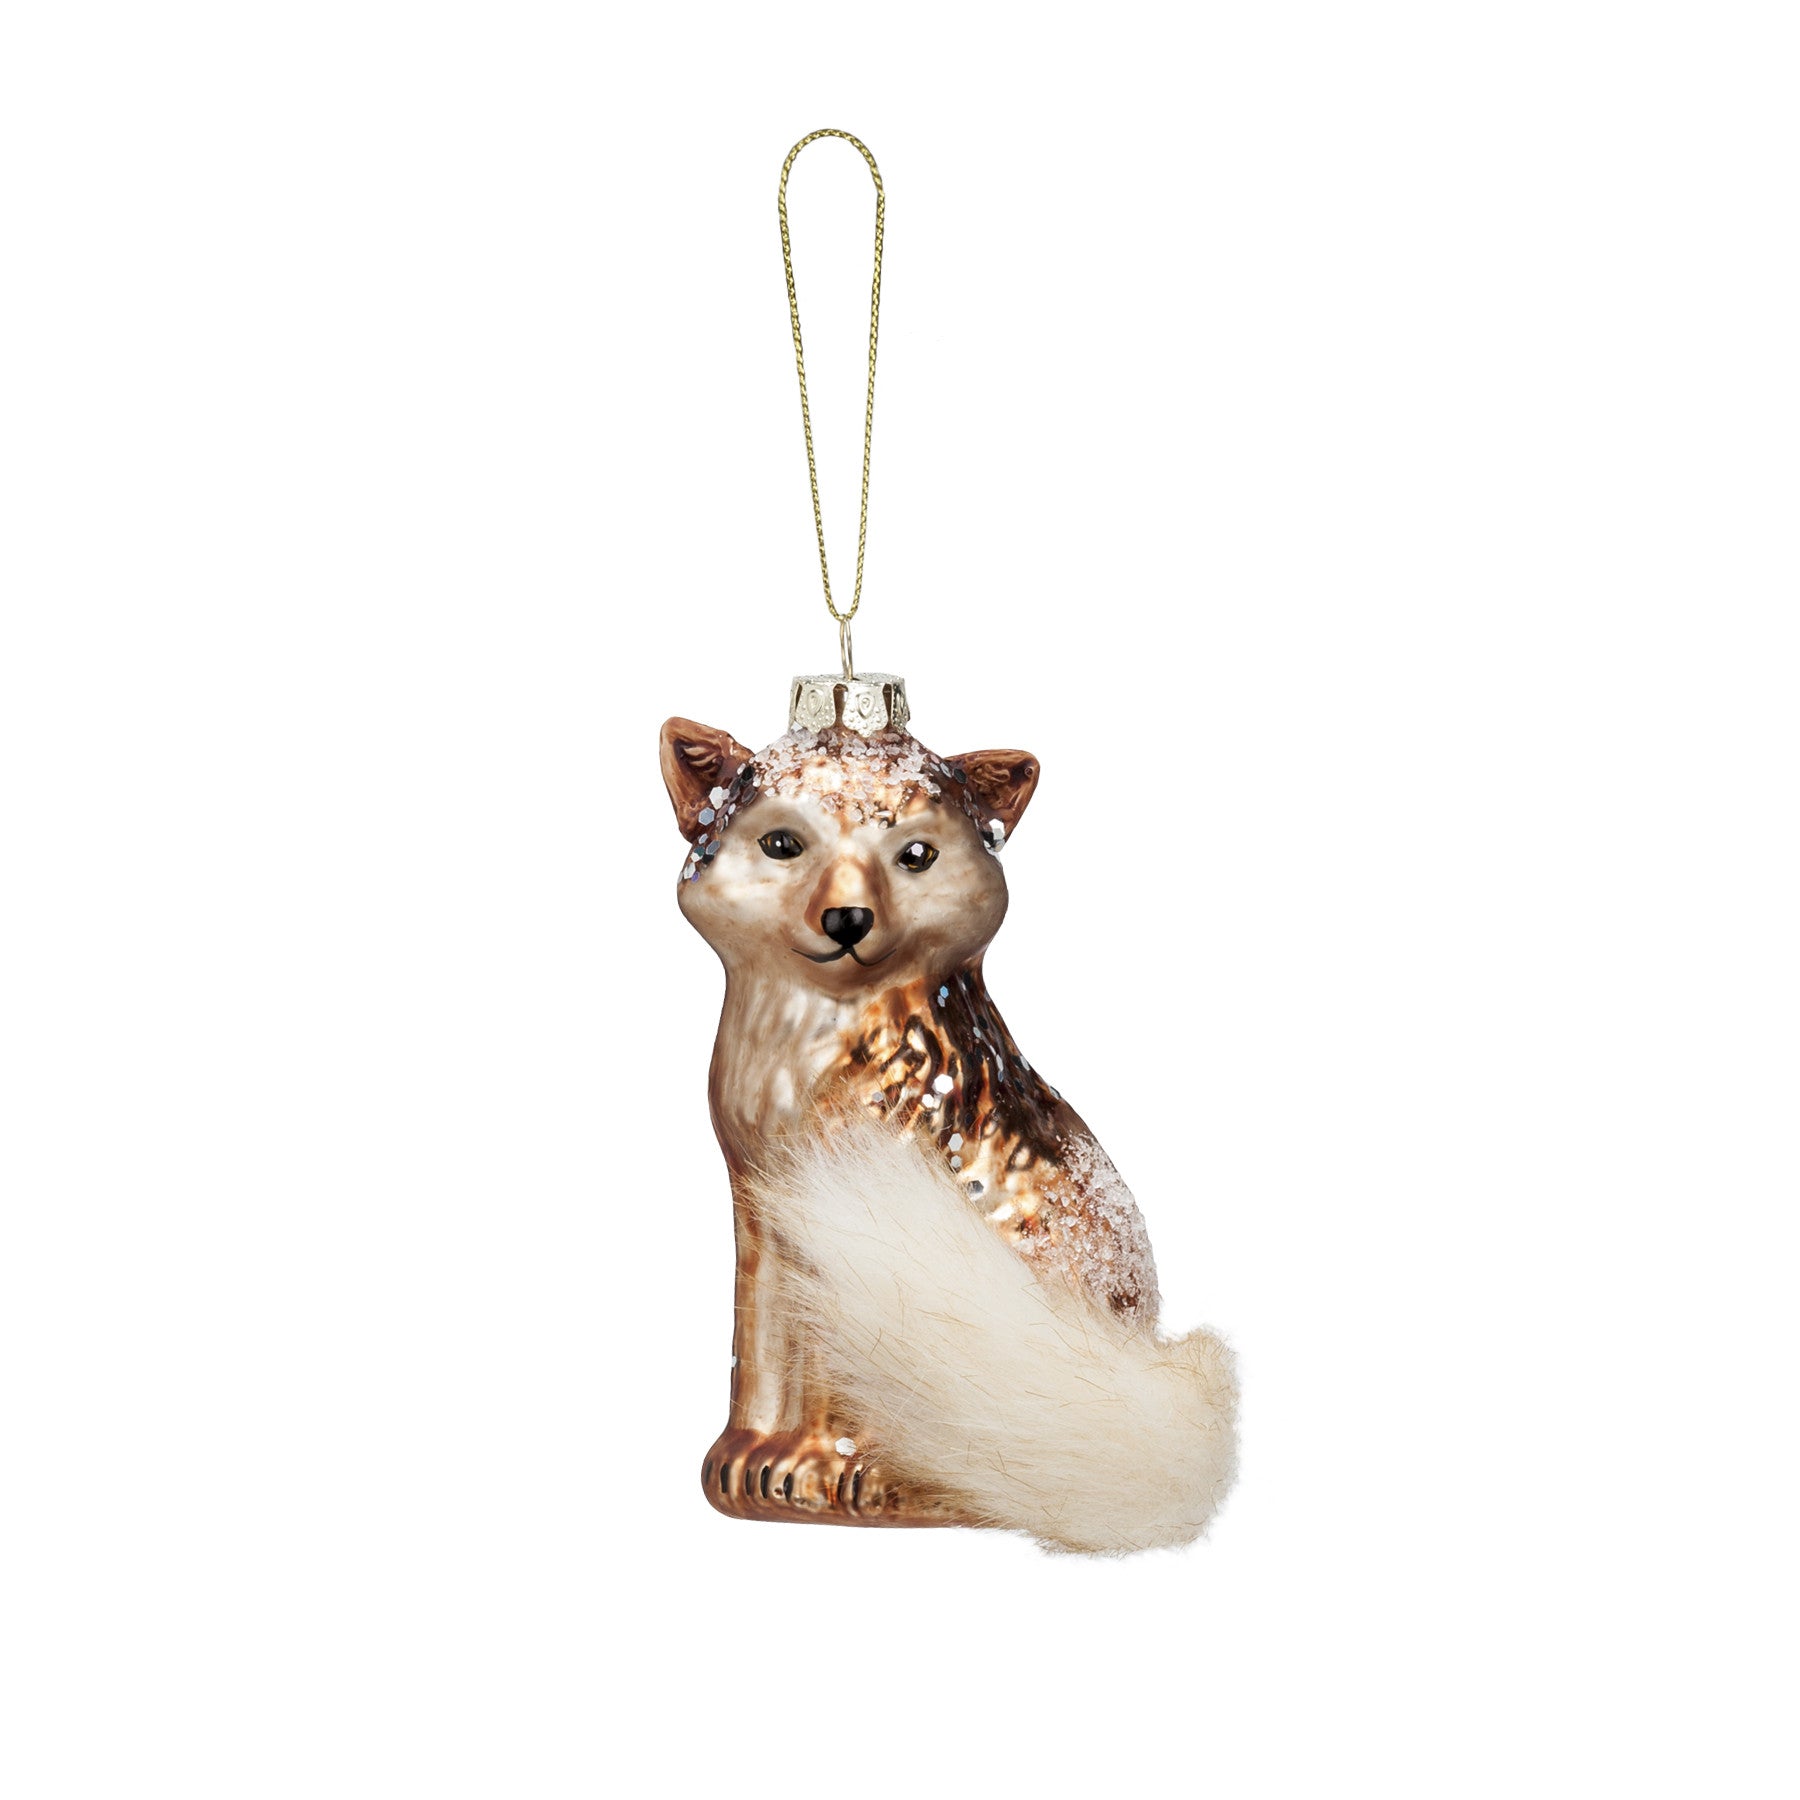  Fox with Tail Ornament, AC-Abbott Collection, Putti Fine Furnishings